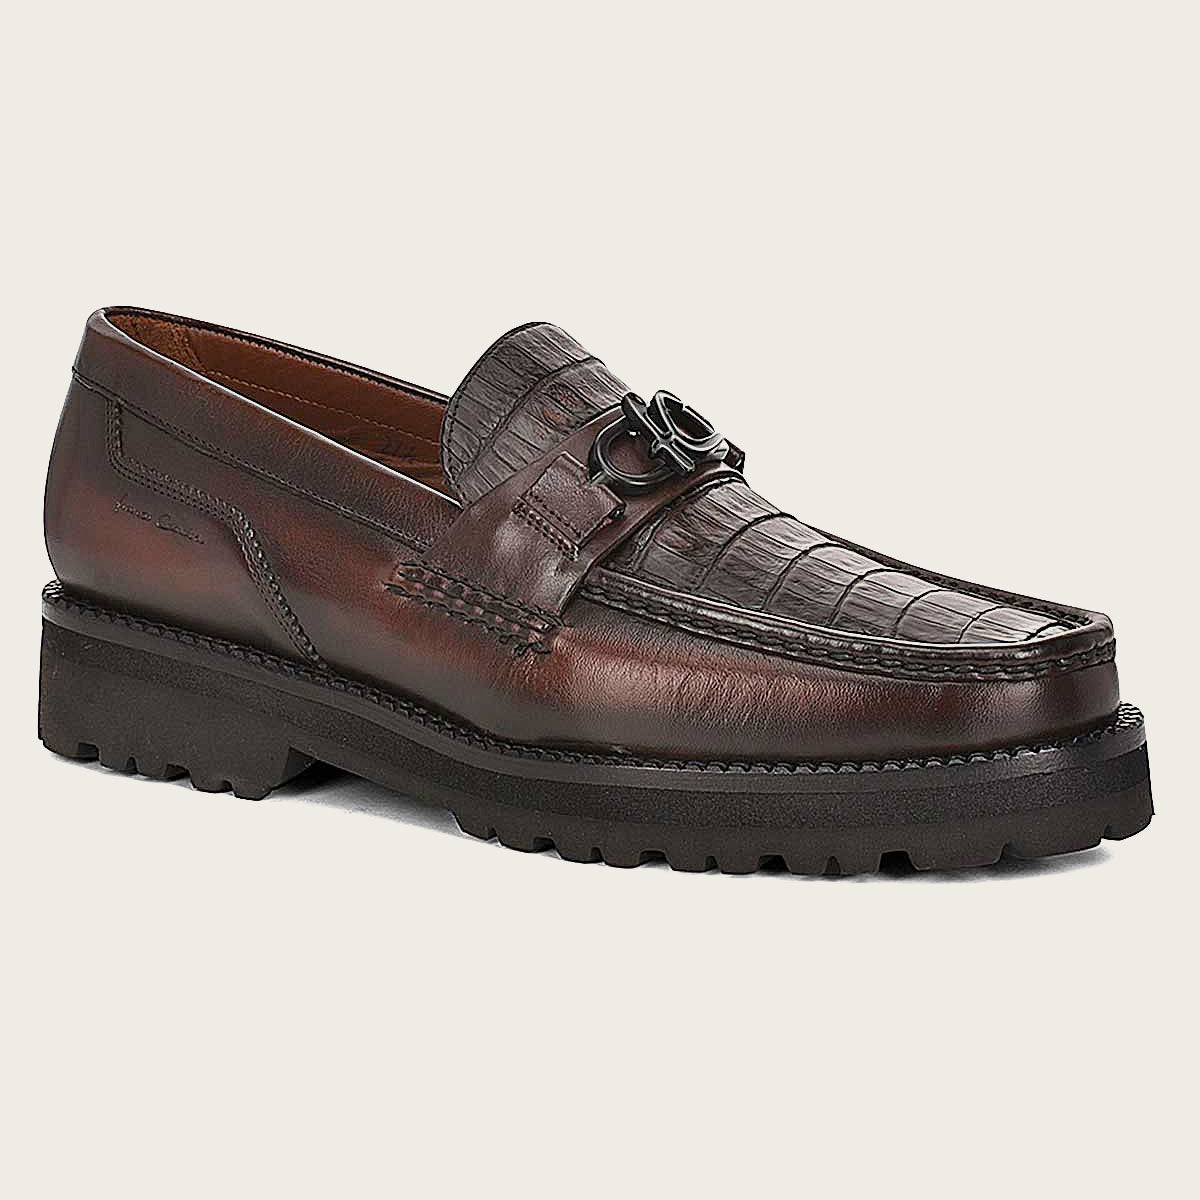 Men loafer shoe in brown genuine cayman leather